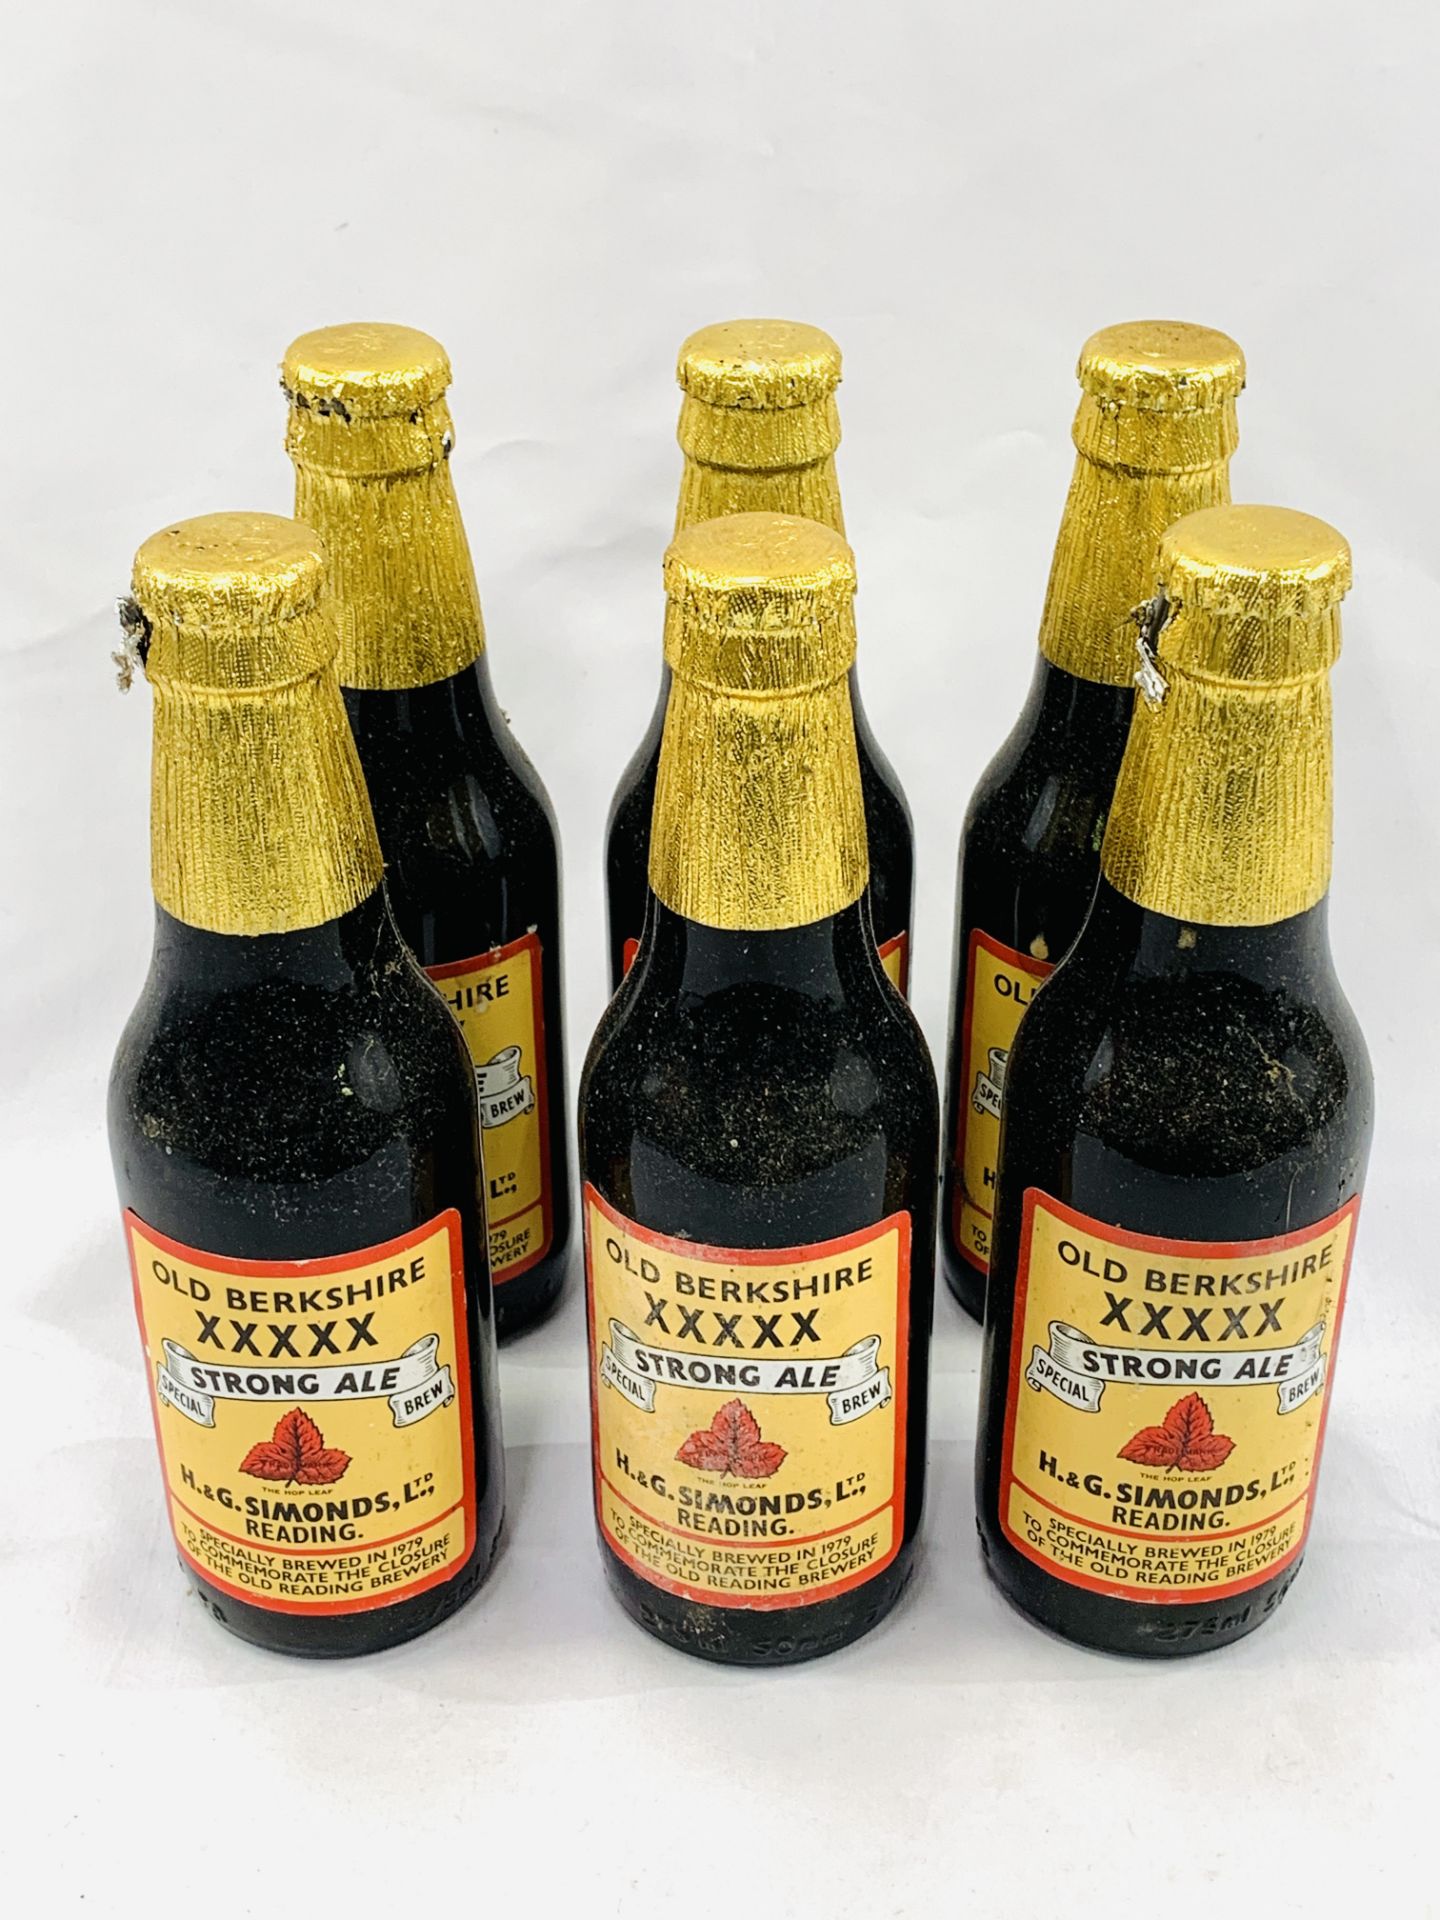 Six 275ml bottles of Old Berkshire XXXXX Strong Ale brewed by H G Simonds, Berkshire